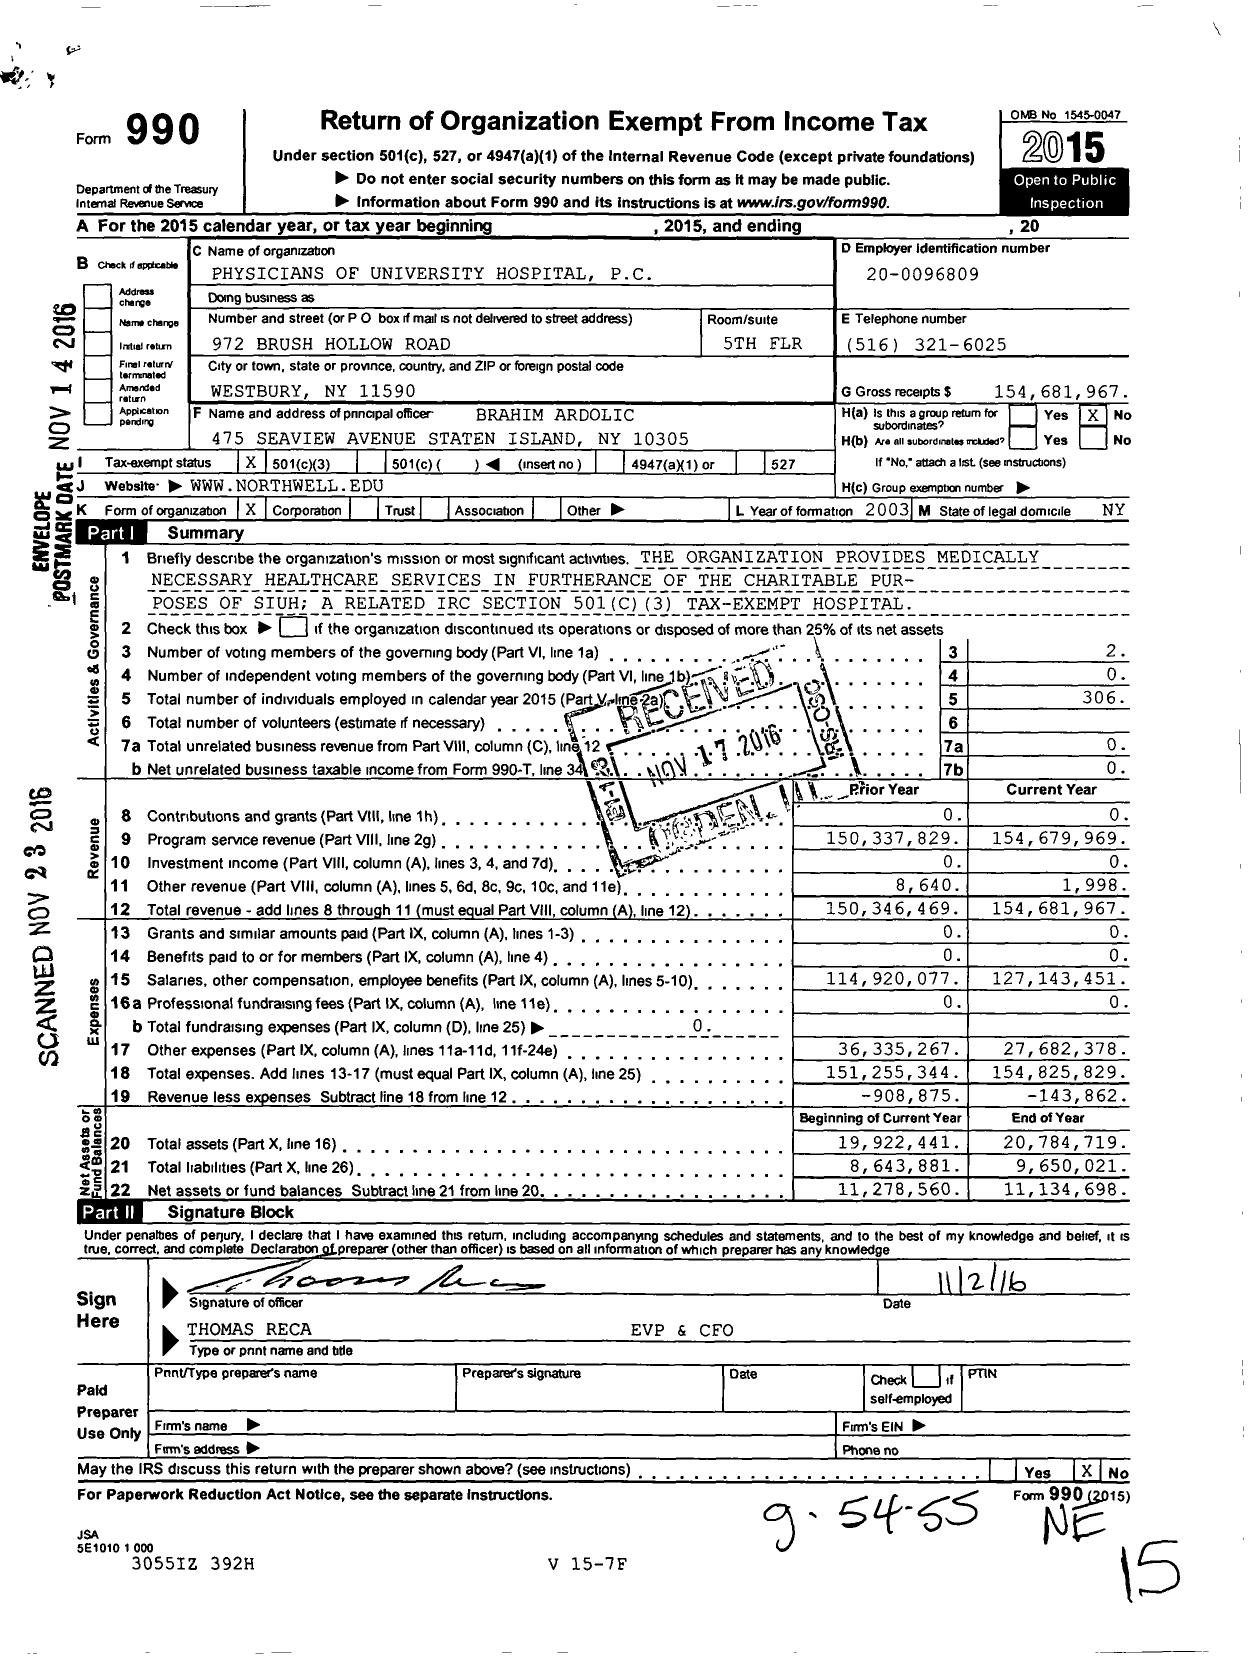 Image of first page of 2015 Form 990 for Physicians of University Hospital PC